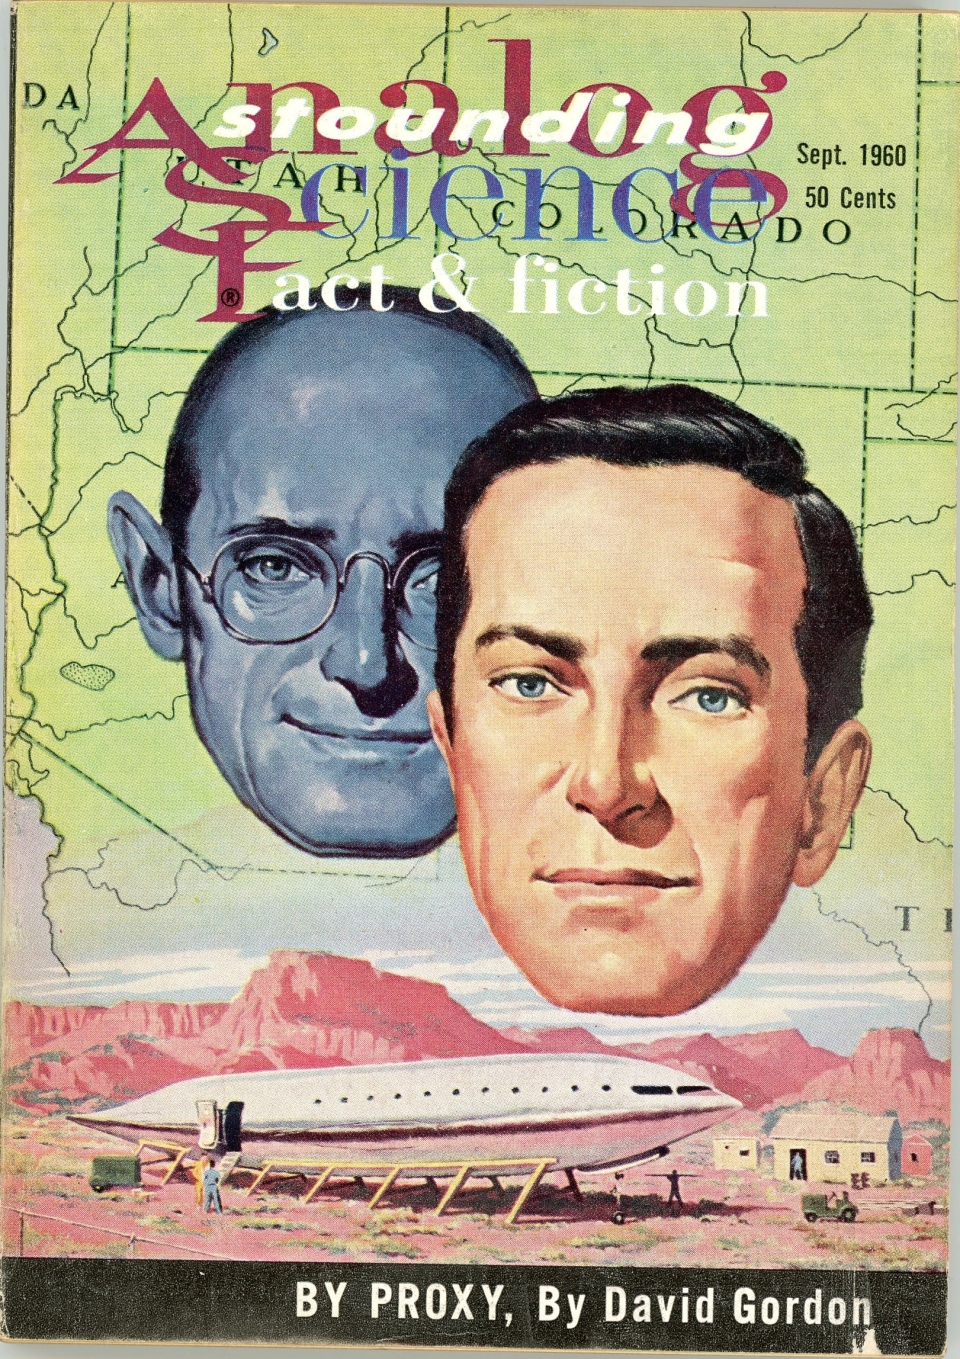 Analog cover depicting two male faces above spaceship being built